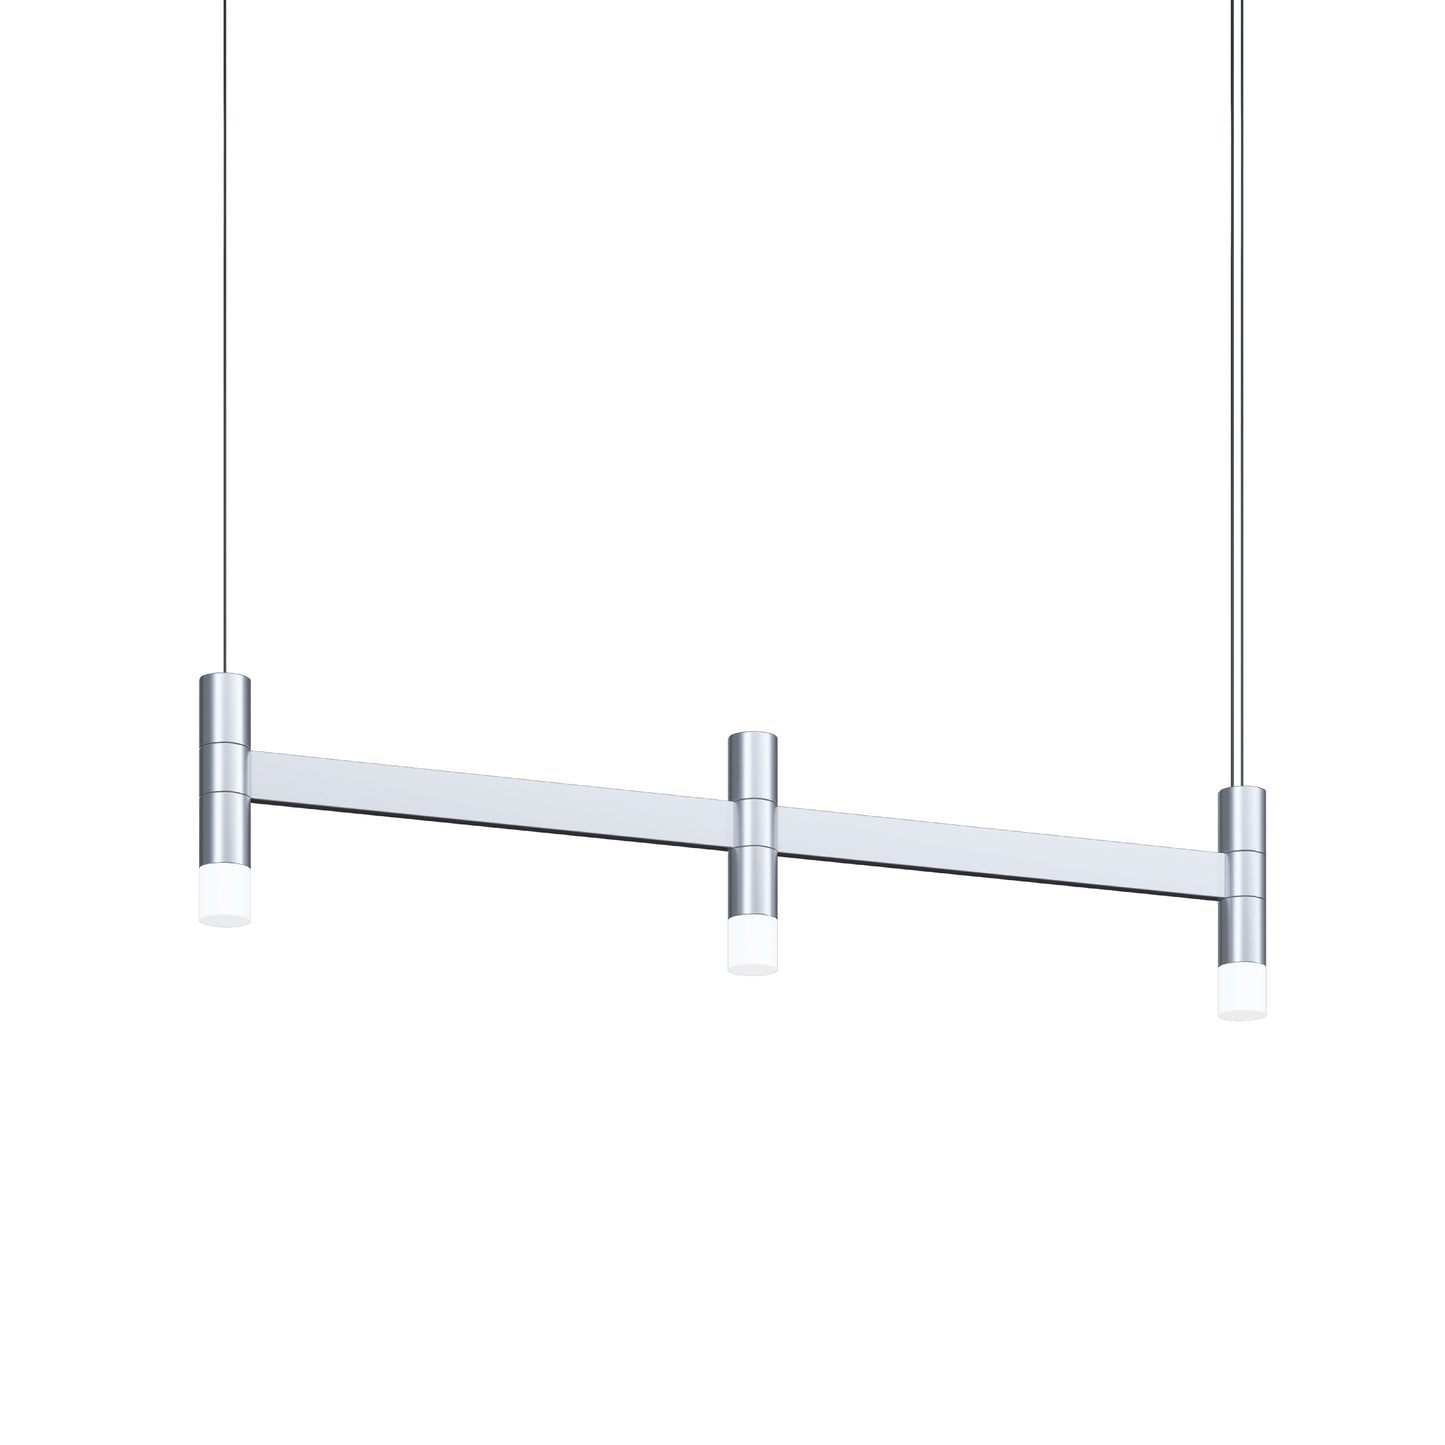 Systema Staccato Linear Pendant Light